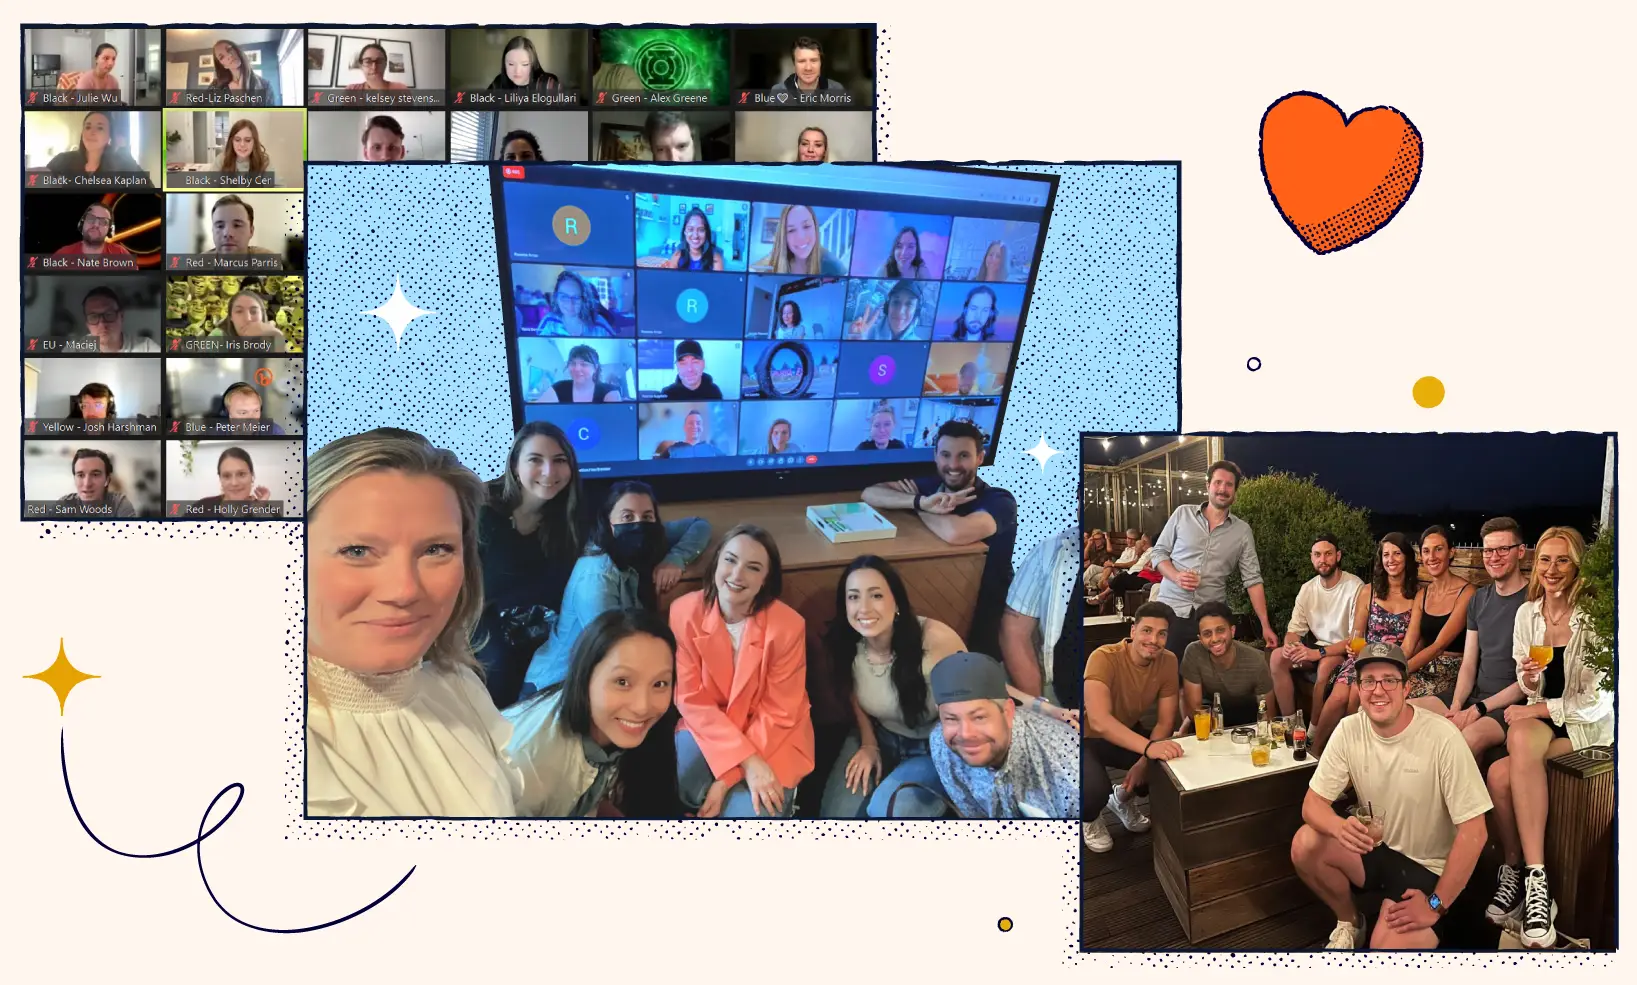 A collage of photos featuring Bitly employees on a remote video call and at a restaurant at night.